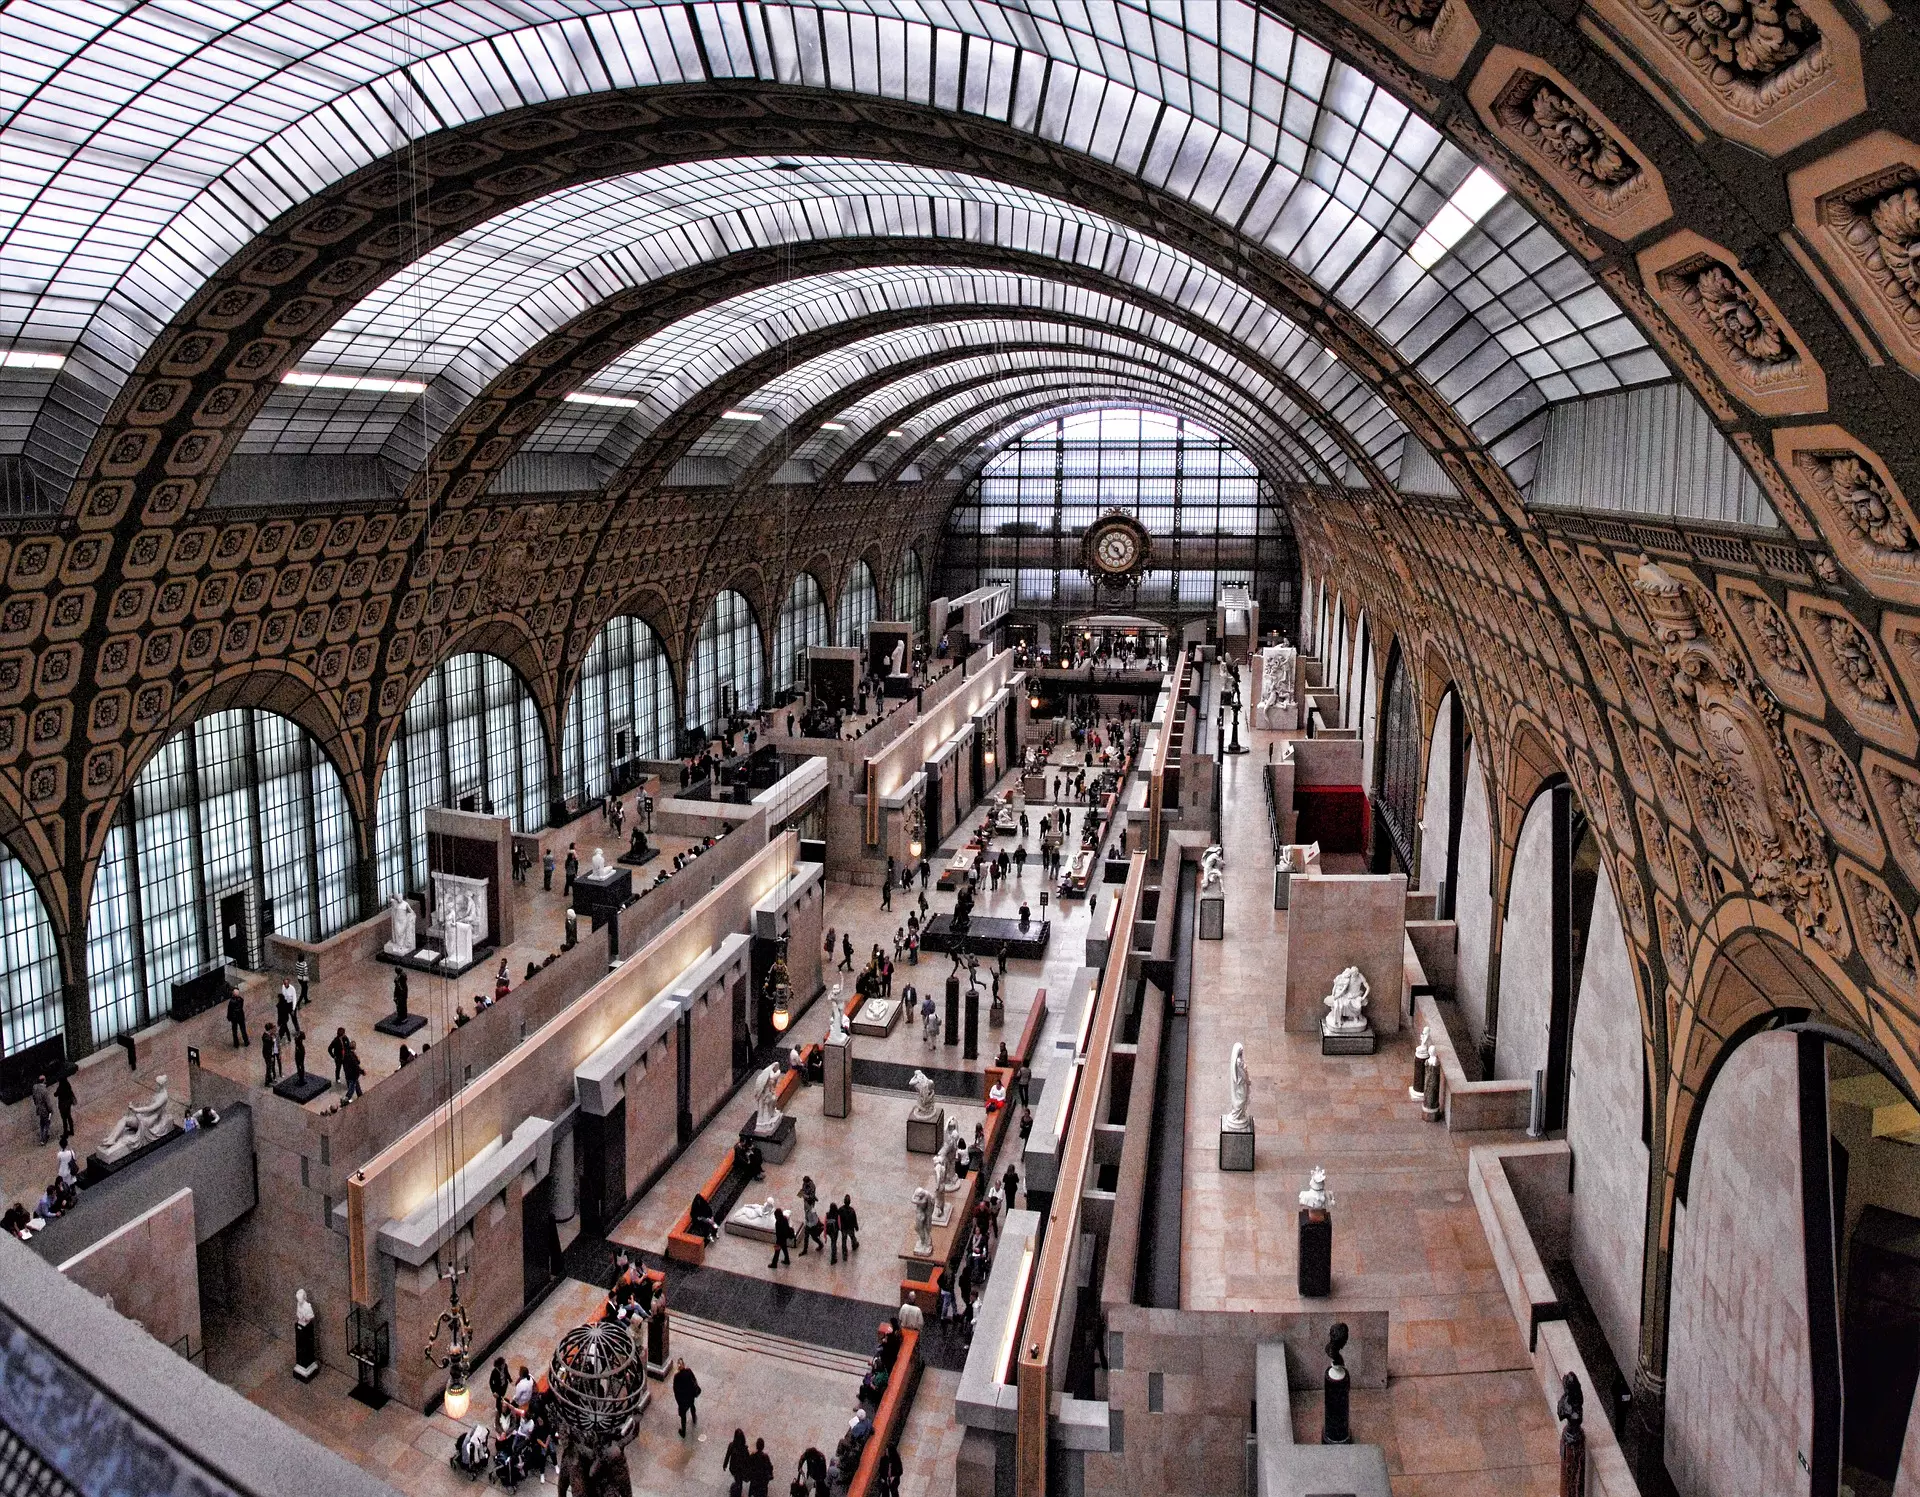 Your Eurostar ticket also gets you 2 for 1 entry at Paris's Musée d'Orsay.